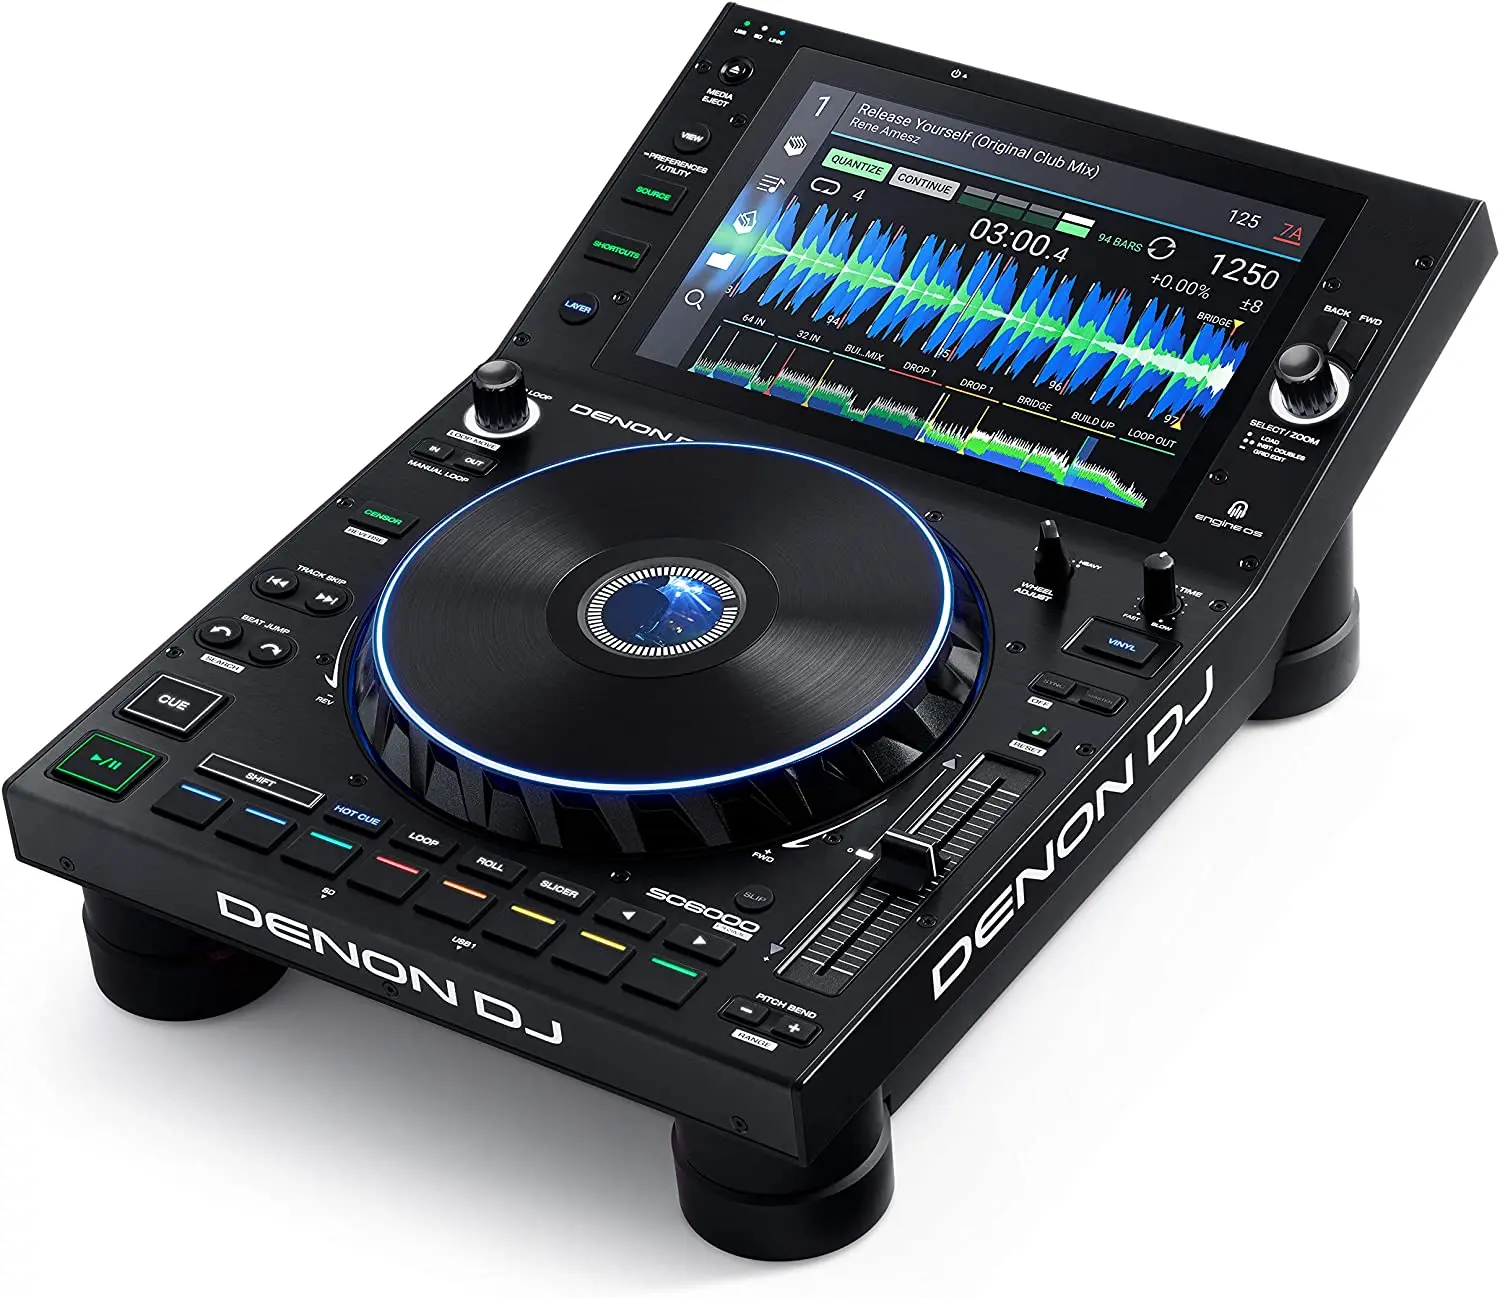 

Denon DJ SC6000 PRIME – Professional Standalone DJ Media Player with WiFi Music Streaming and 10.1-Inch Touchscreen